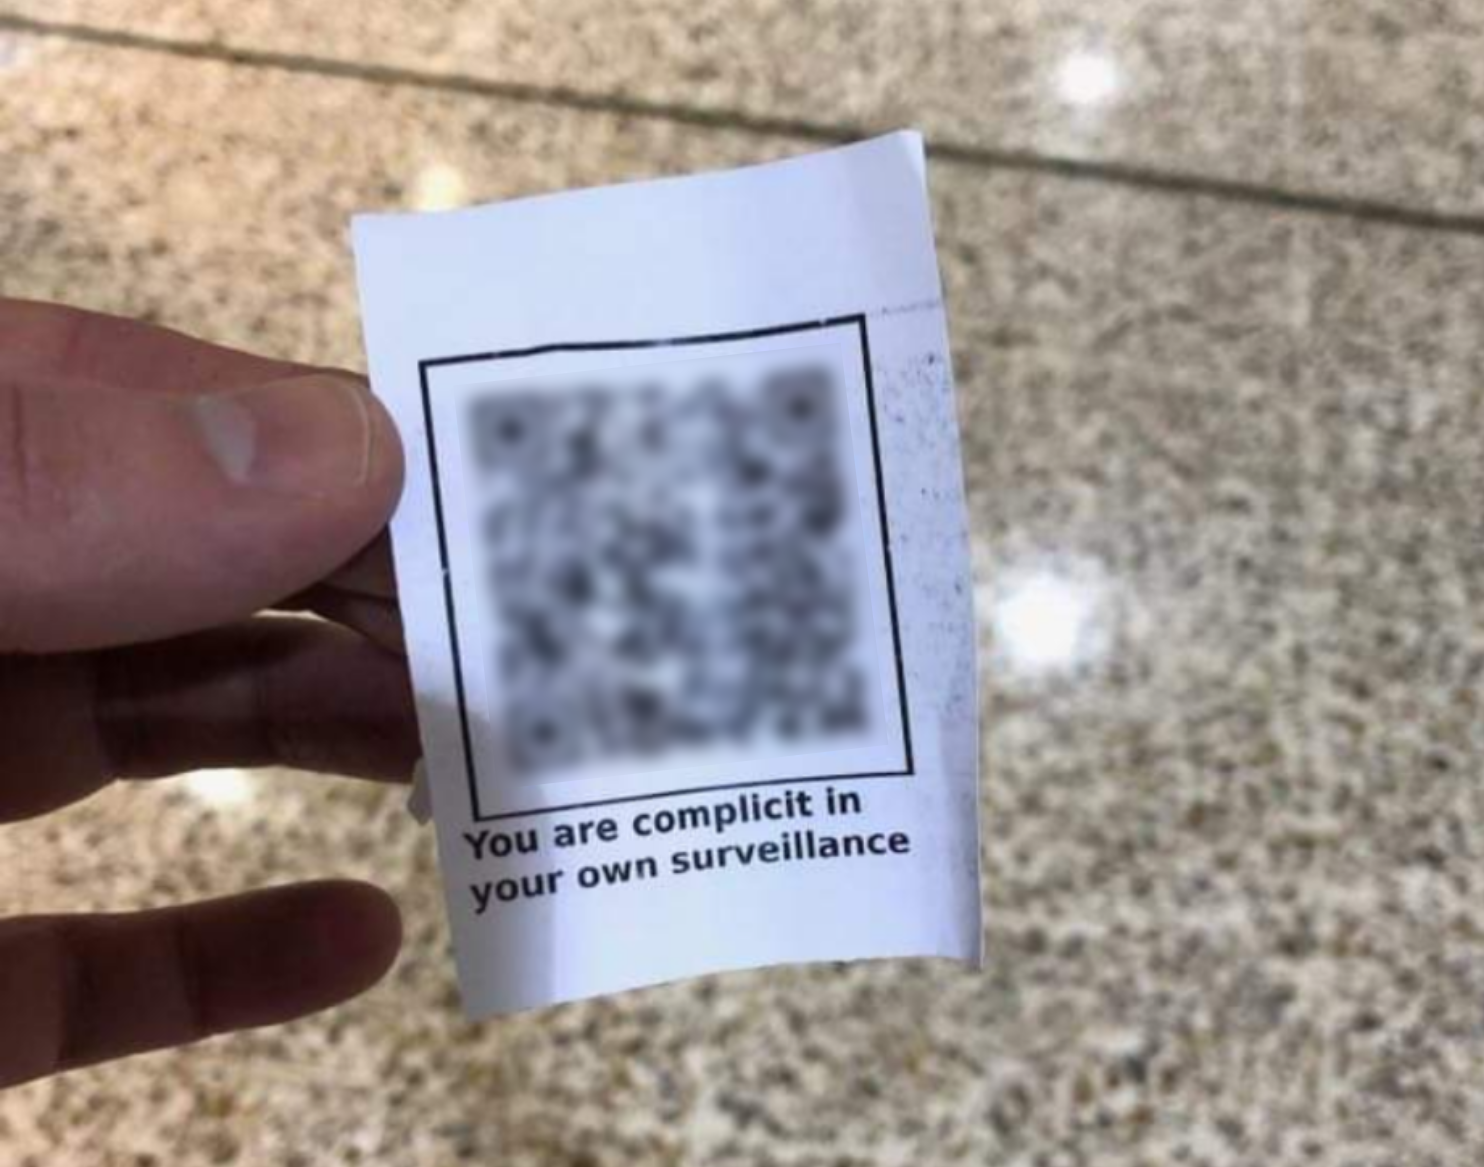 Fake check-in QR codes emerge in Canberra